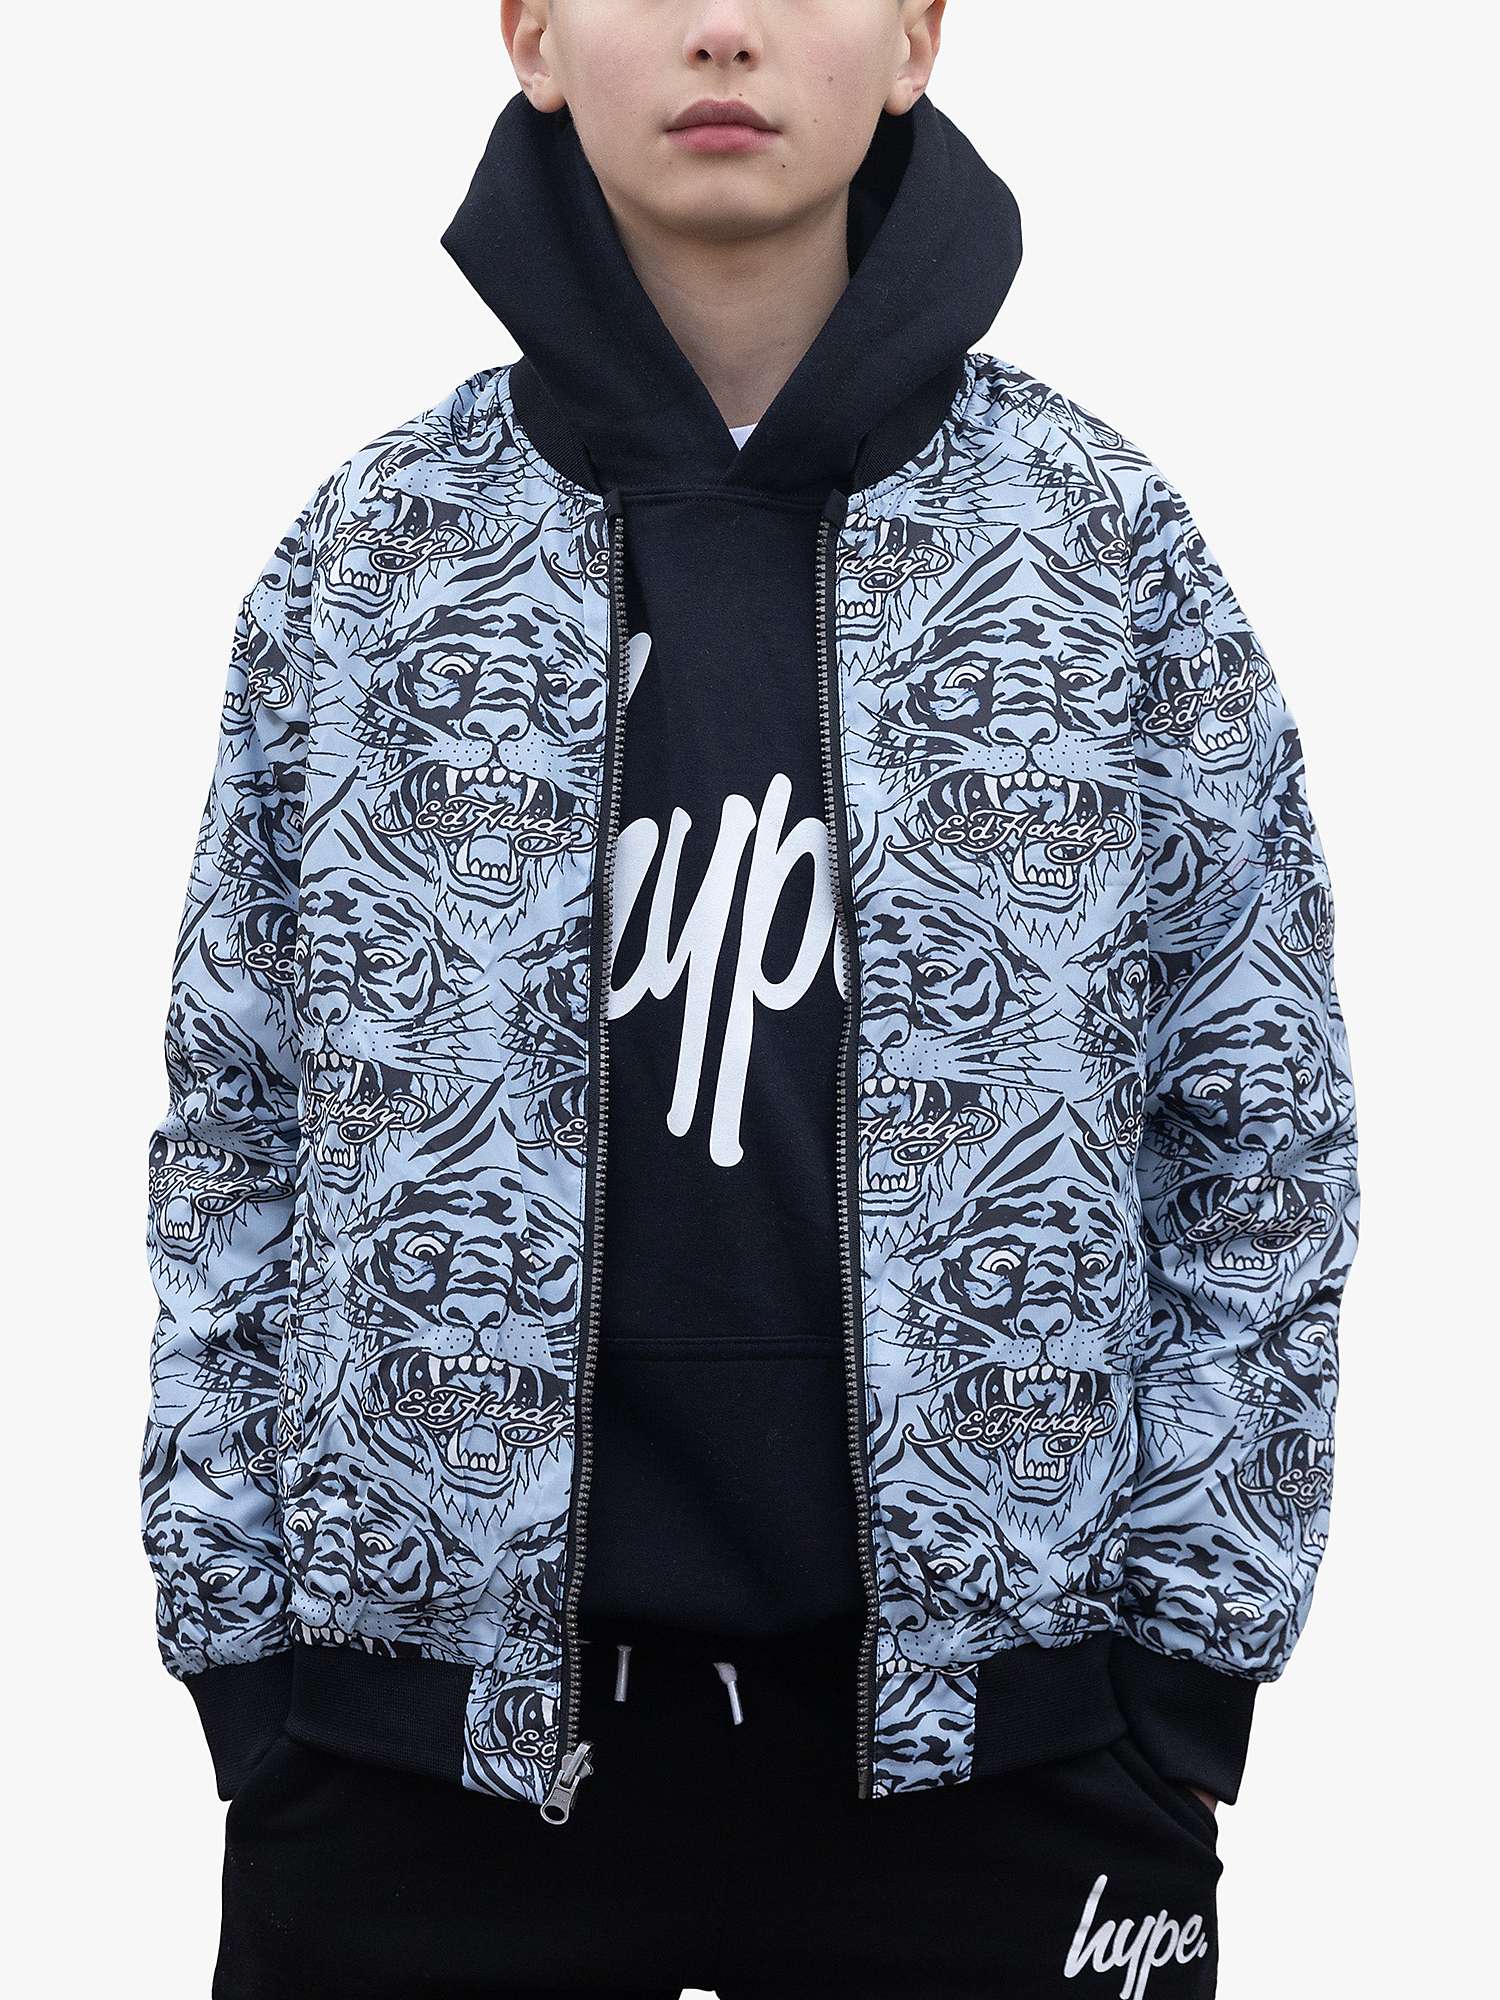 Buy Hype Kids' HYPE. x Ed Hardy Reversible All Over Tiger Souvenir Jacket, Black Online at johnlewis.com